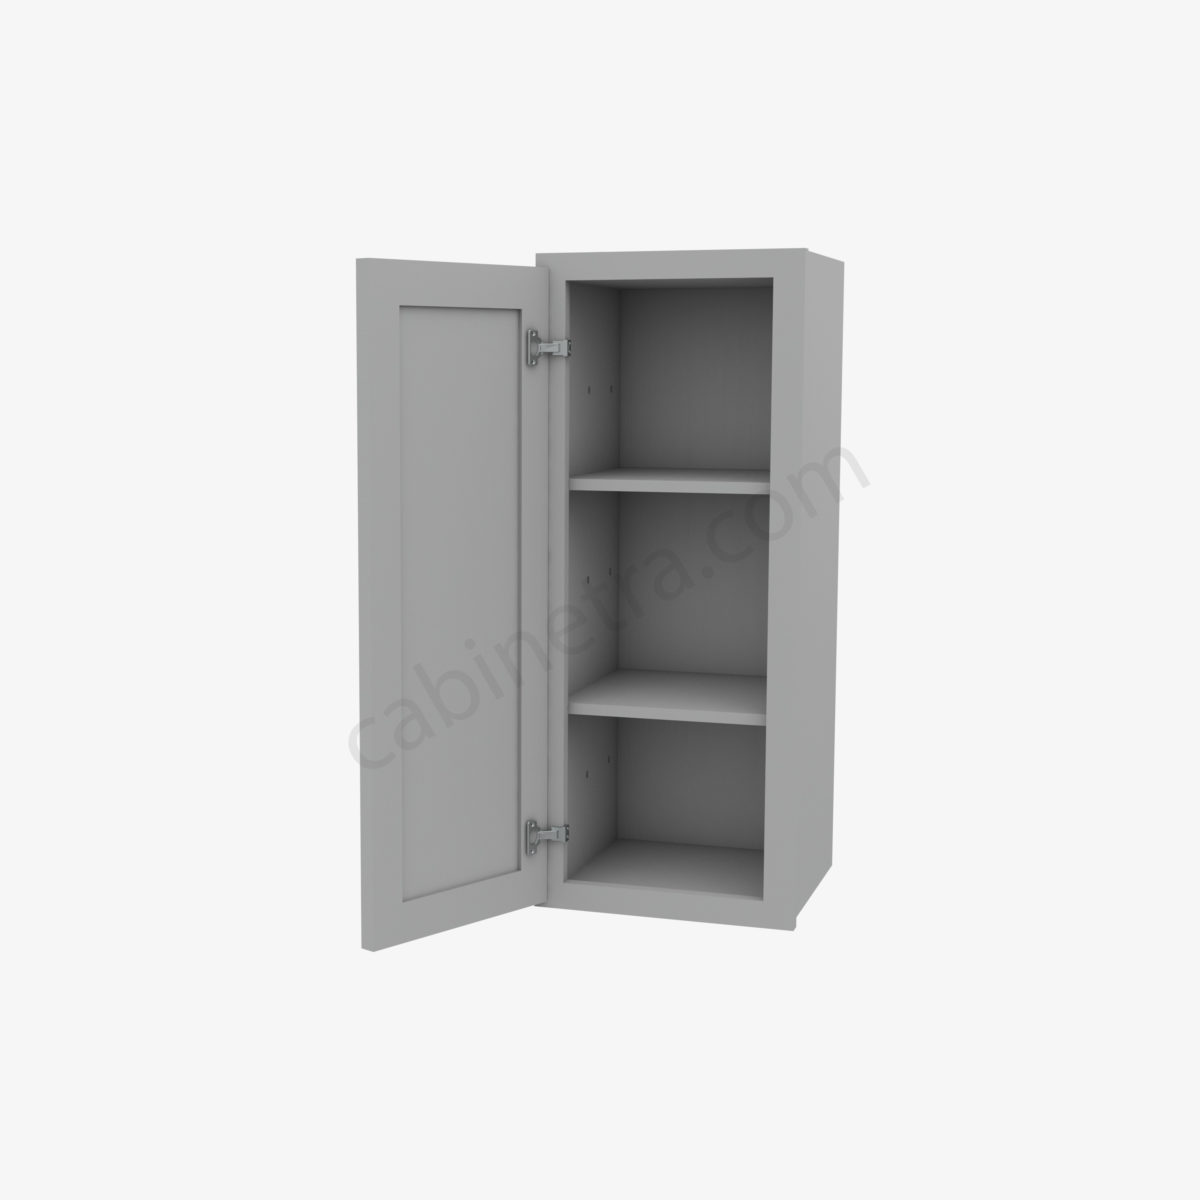 AB W1230 5 Forevermark Lait Gray Shaker Cabinetra scaled